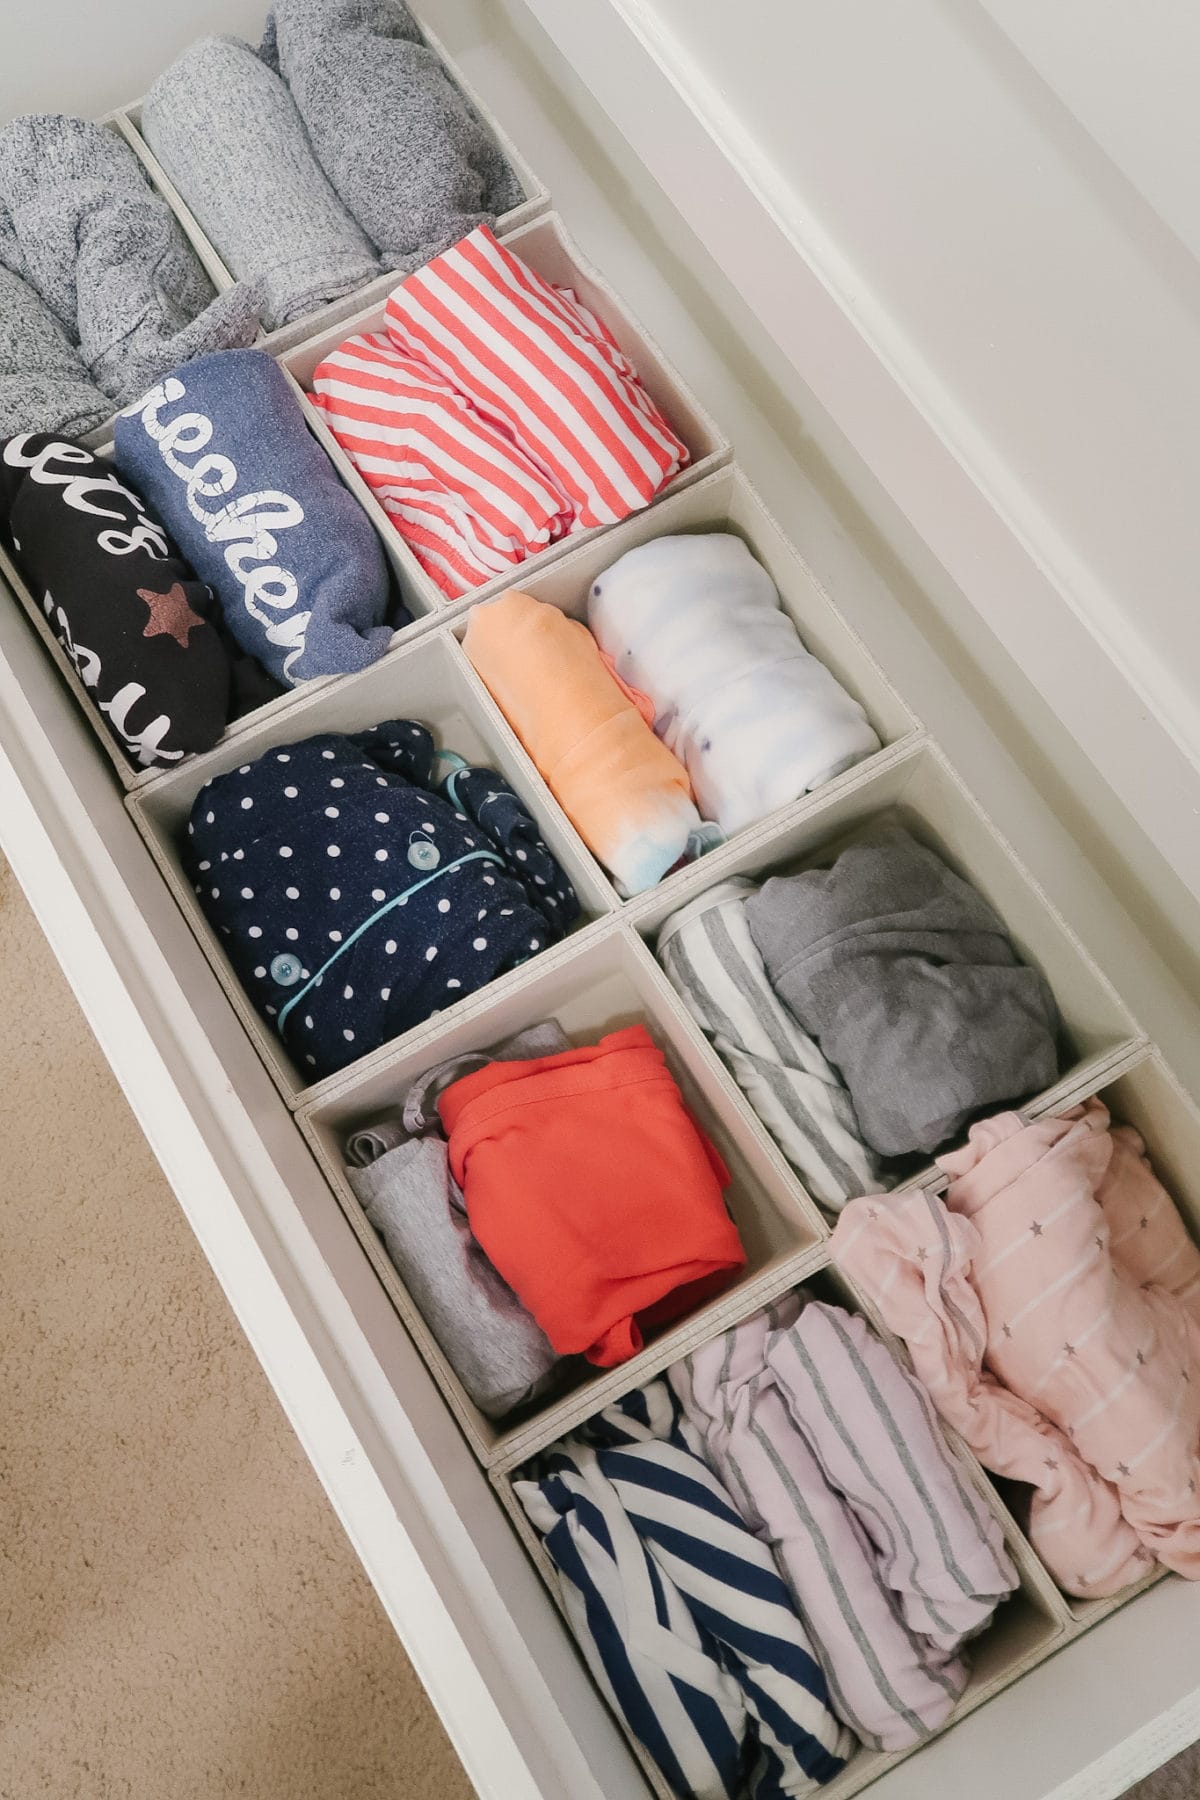 42 Things in Your Master Bedroom Closet and Drawers - Toot Sweet 4 Two